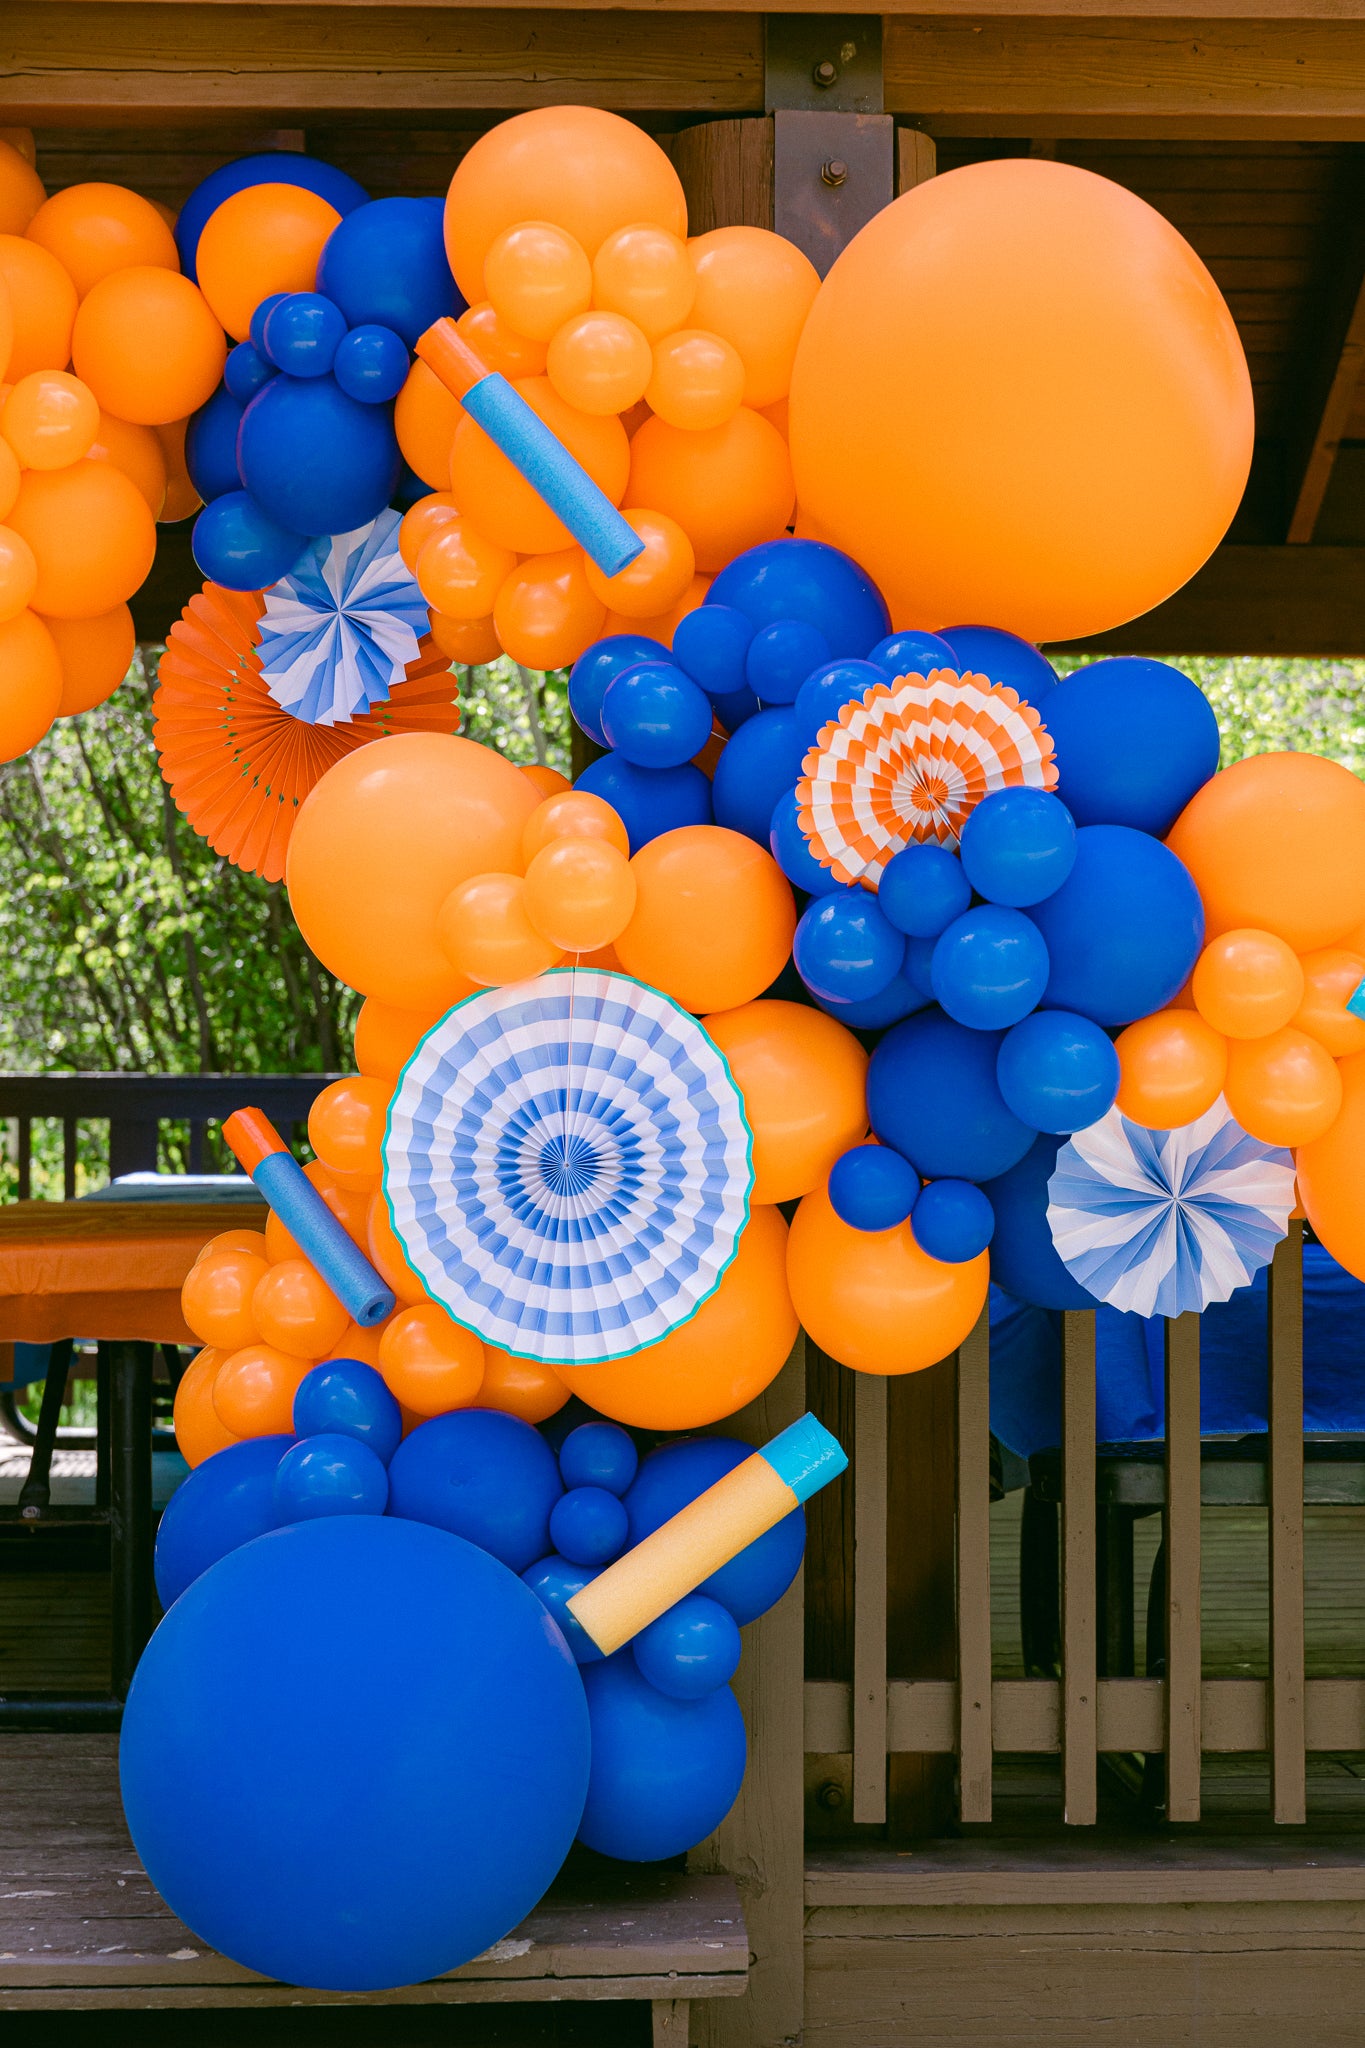 Nerf birthday party decoration ideas using party fans and darts.